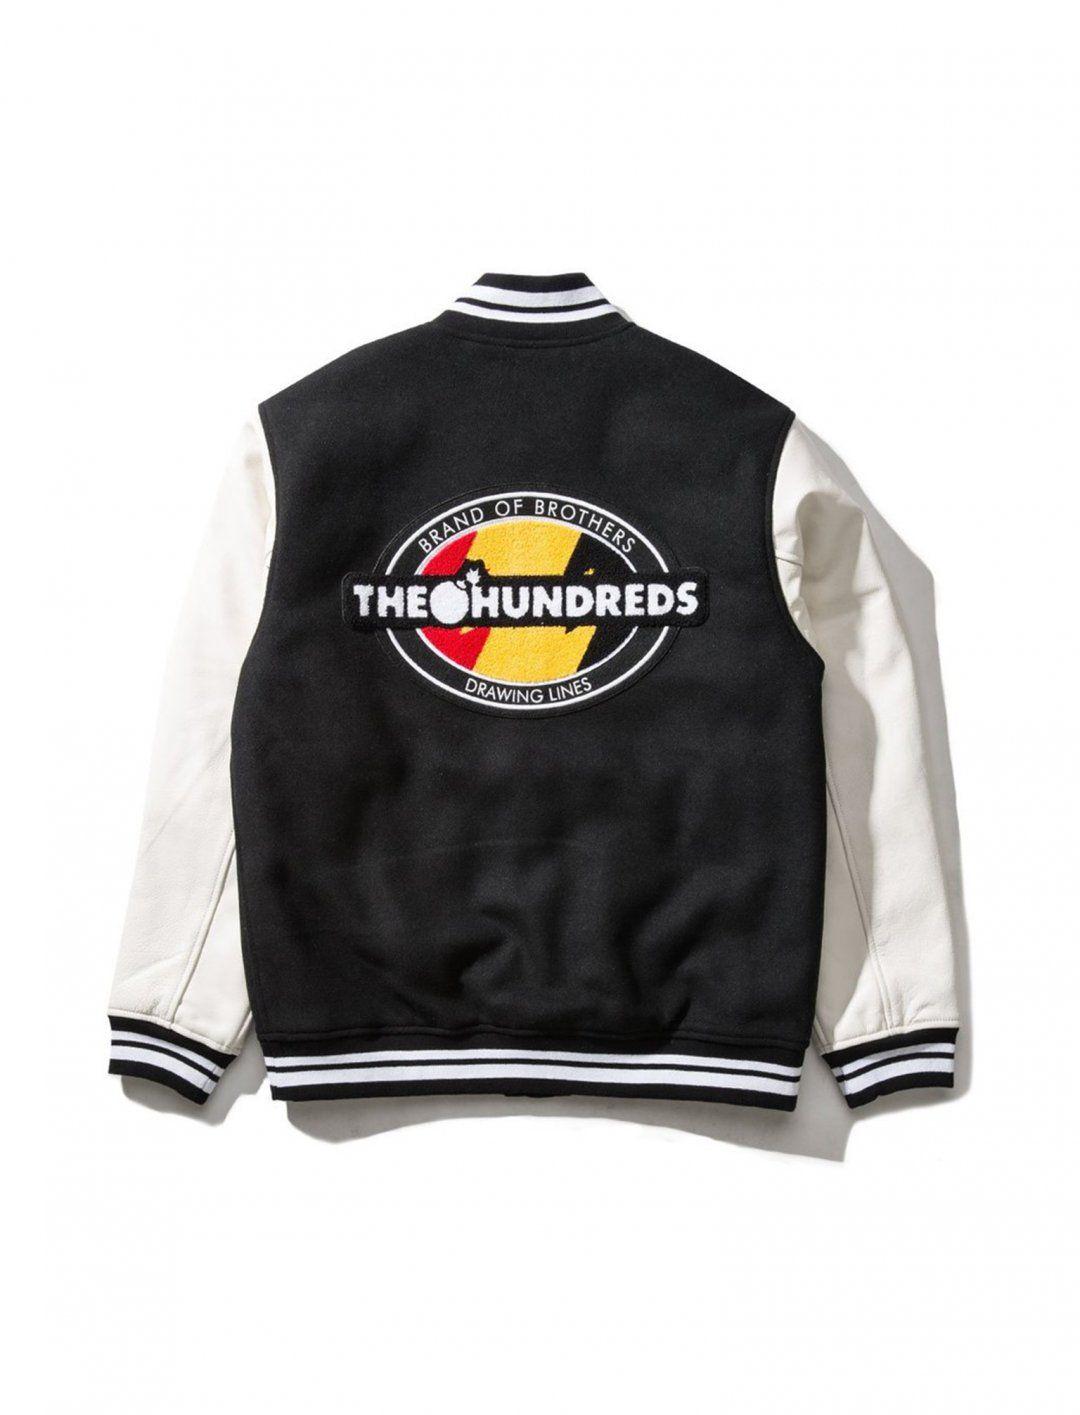 Hundreds Drawing Logo - Gashi Jacket, Crew Style from The Hundreds Face No Care Music Video